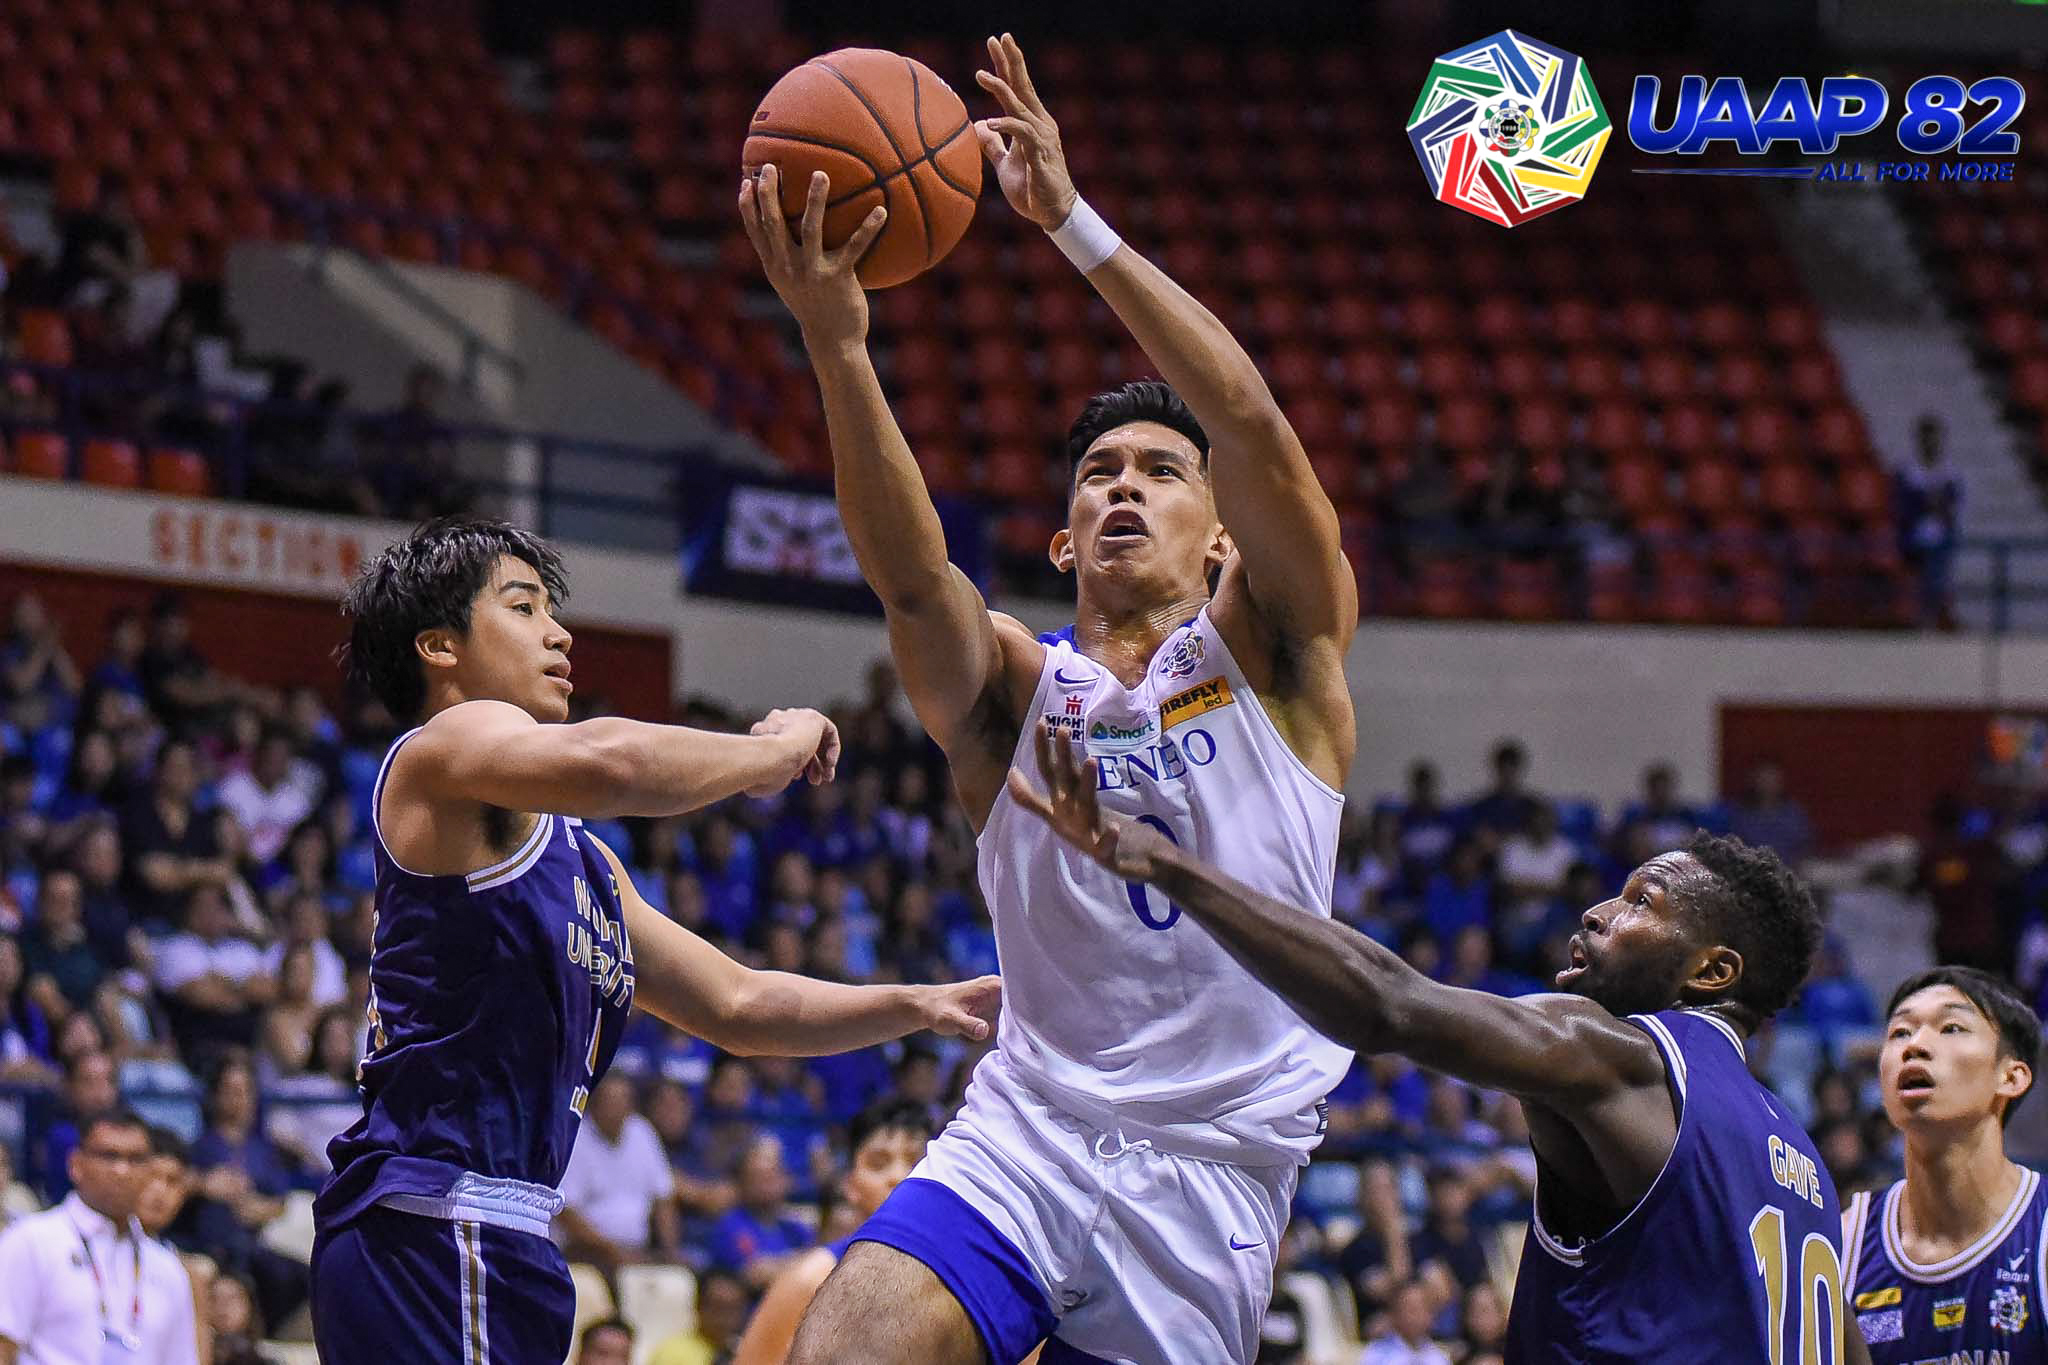 Ateneo stays perfect, sends NU to 5th straight loss